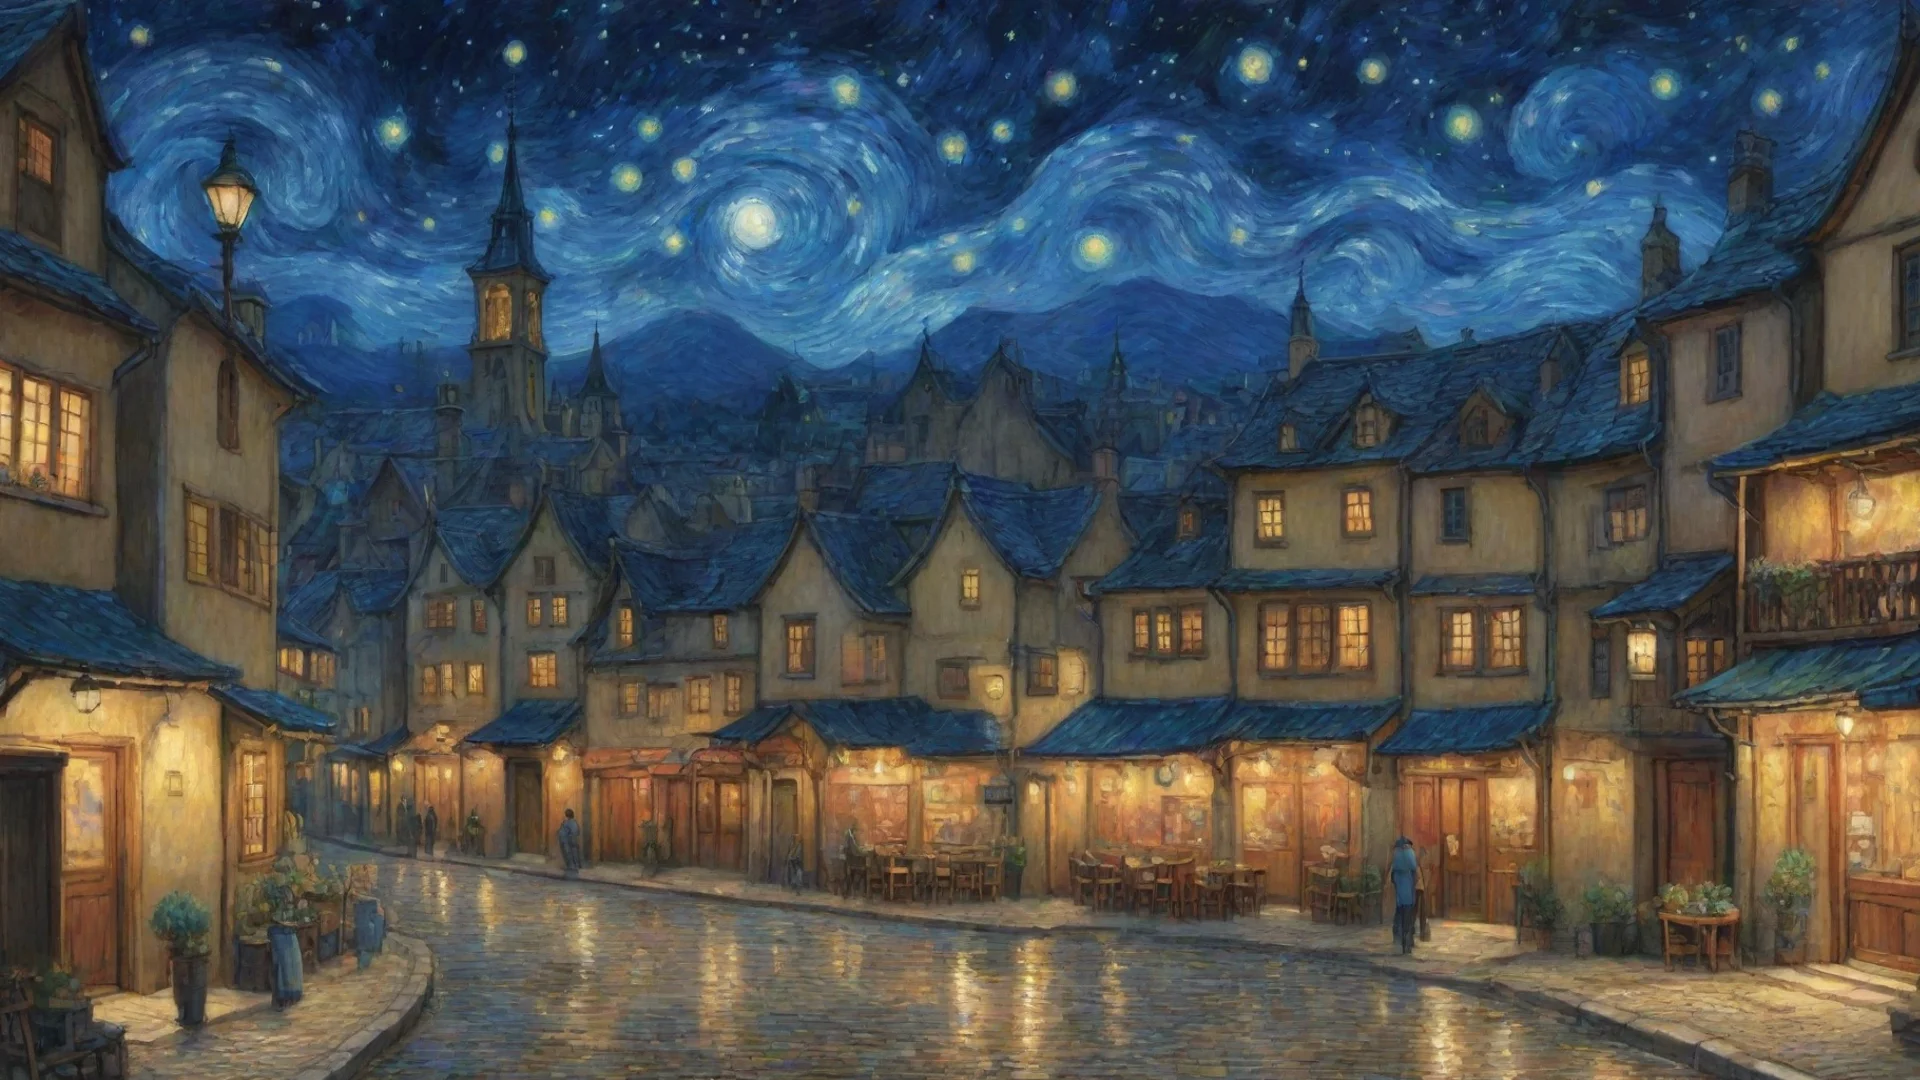 aiamazing epic lovely artistic ghibli van gogh stary night anime town detailed asthetic awesome portrait 2 wide